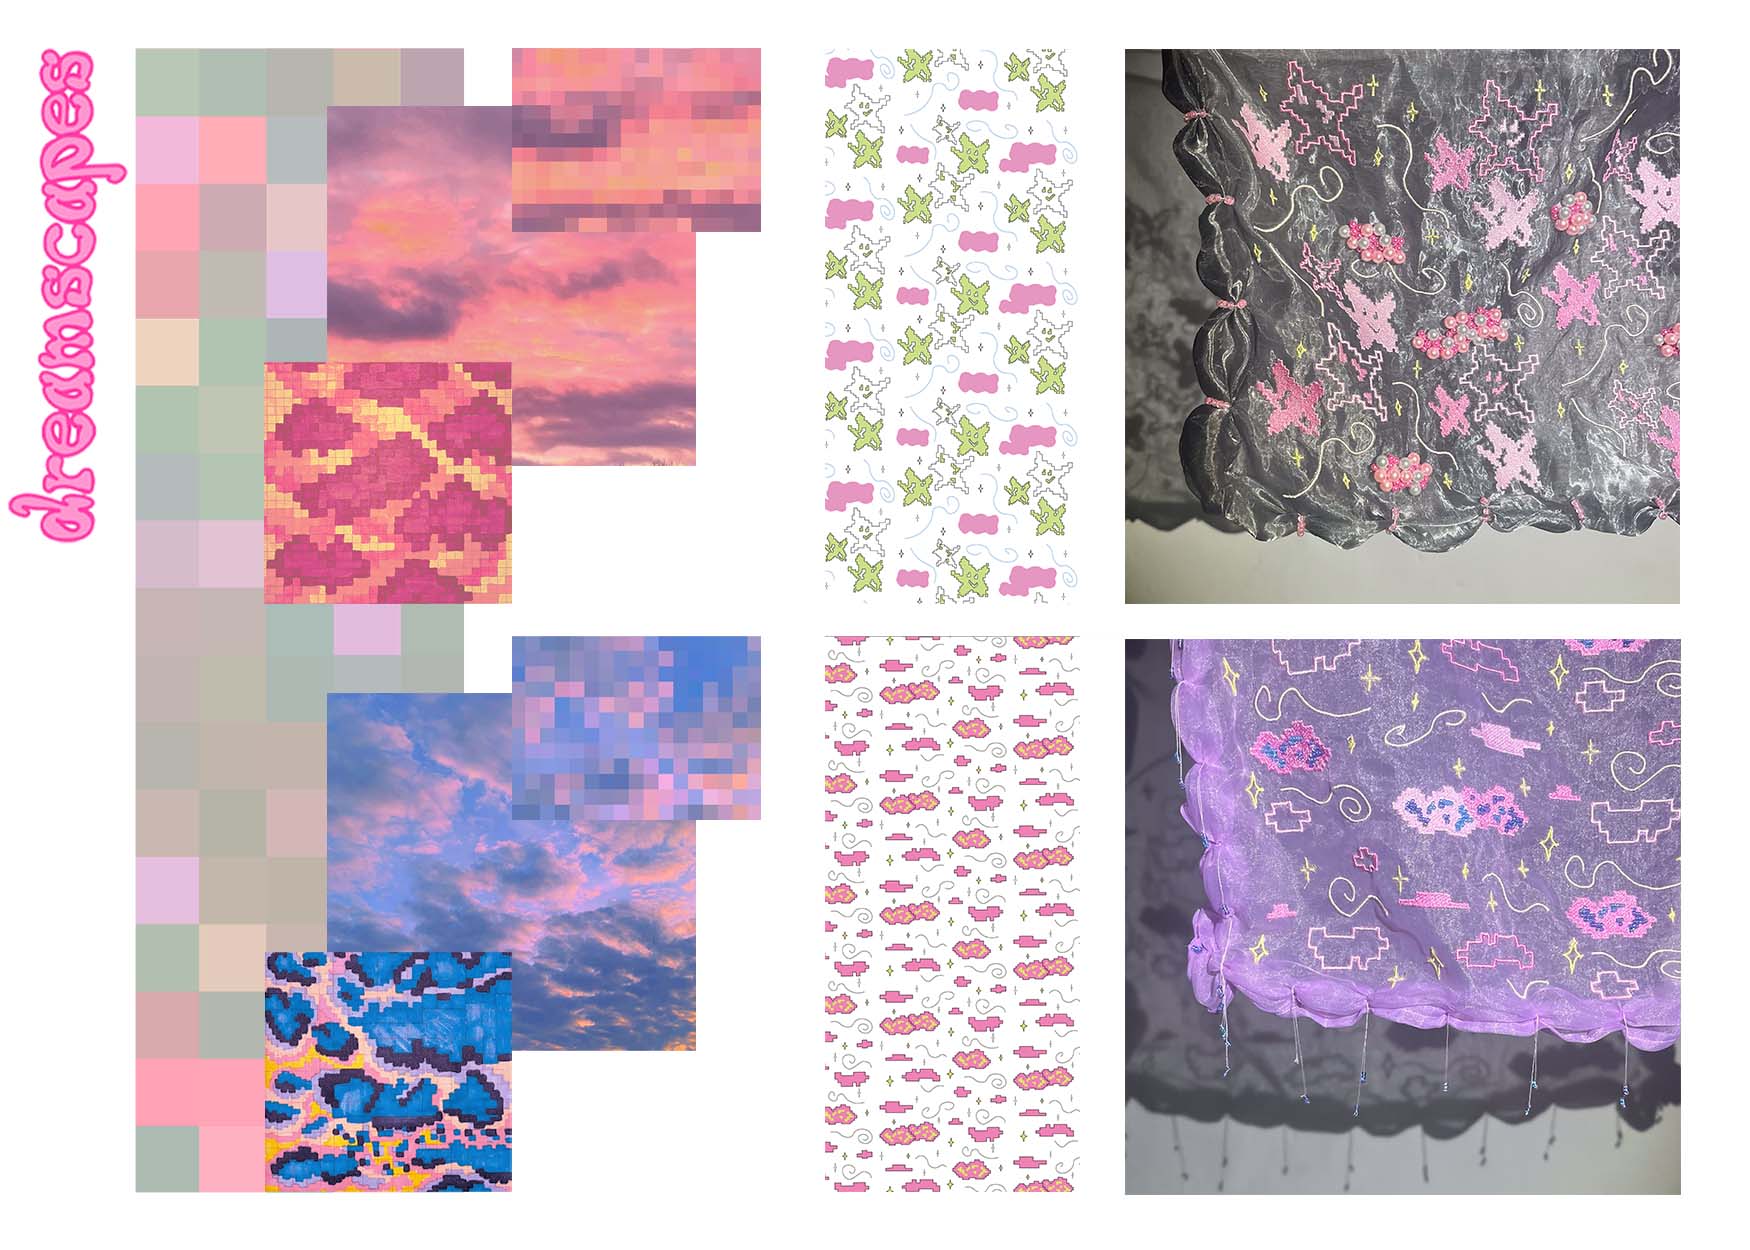 Board showing development of sunset imagery into digital drawings for embroidery by Tash Conquest